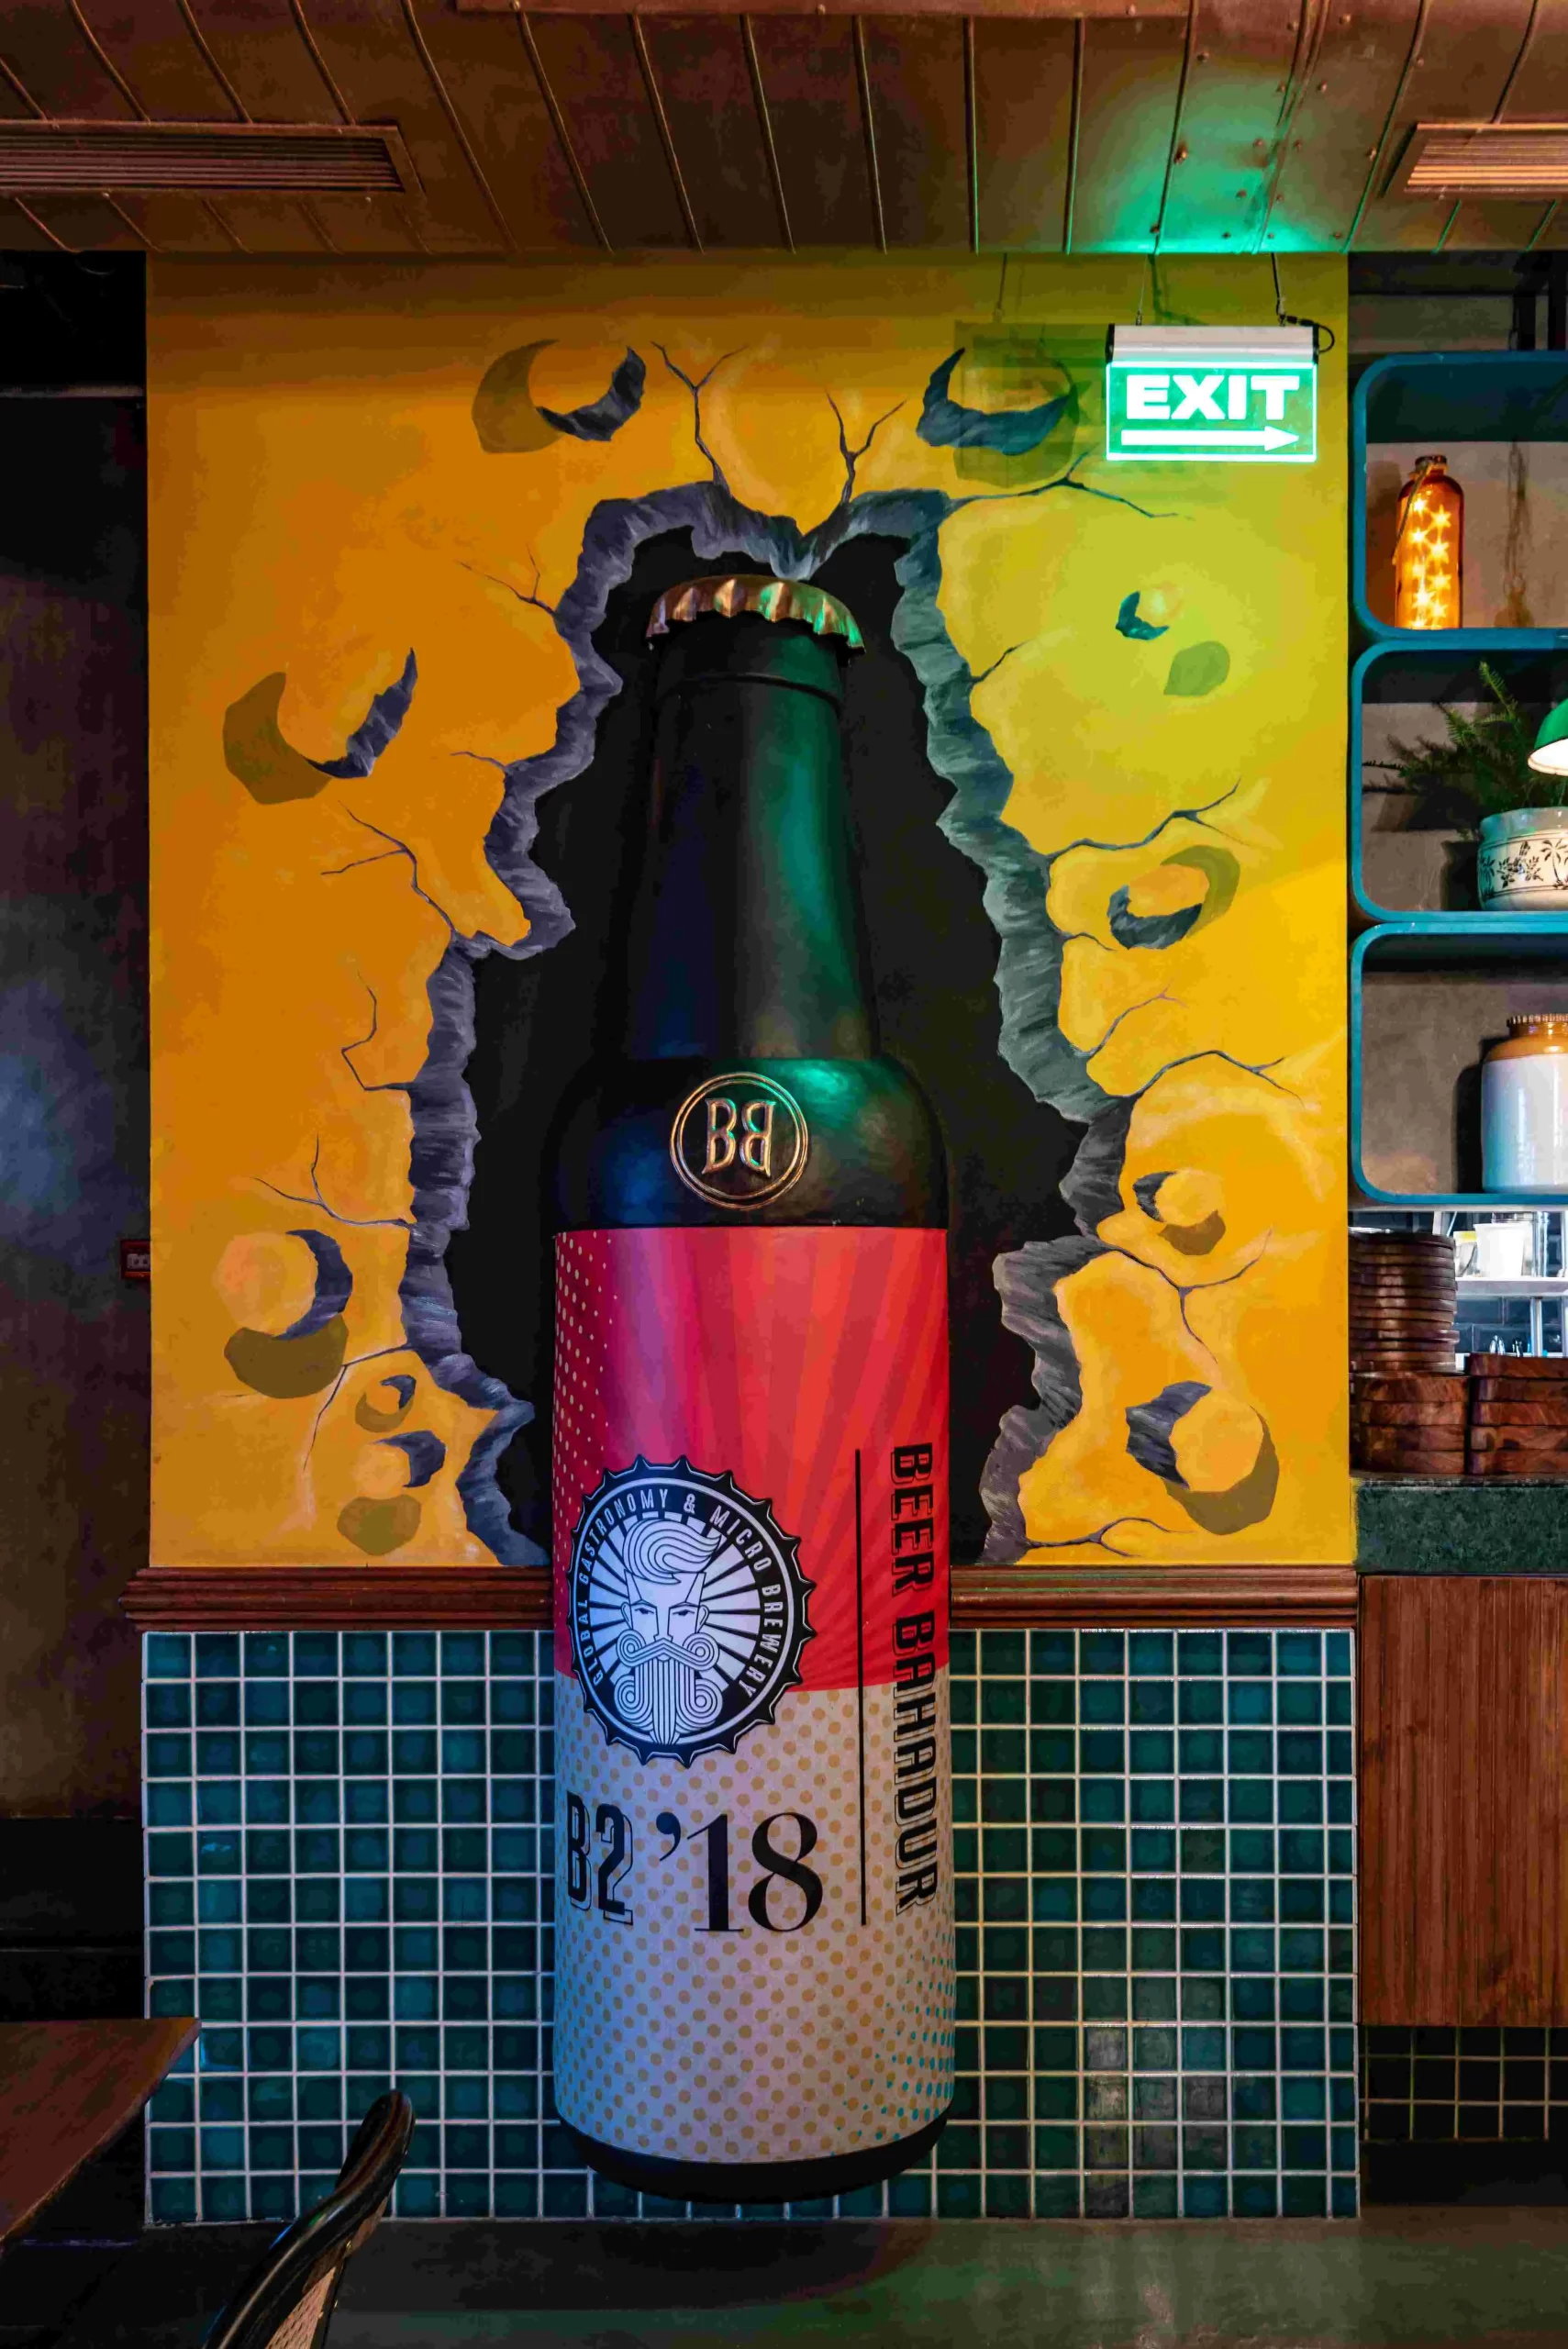 A beer bottle is painted on the wall of a restaurant.